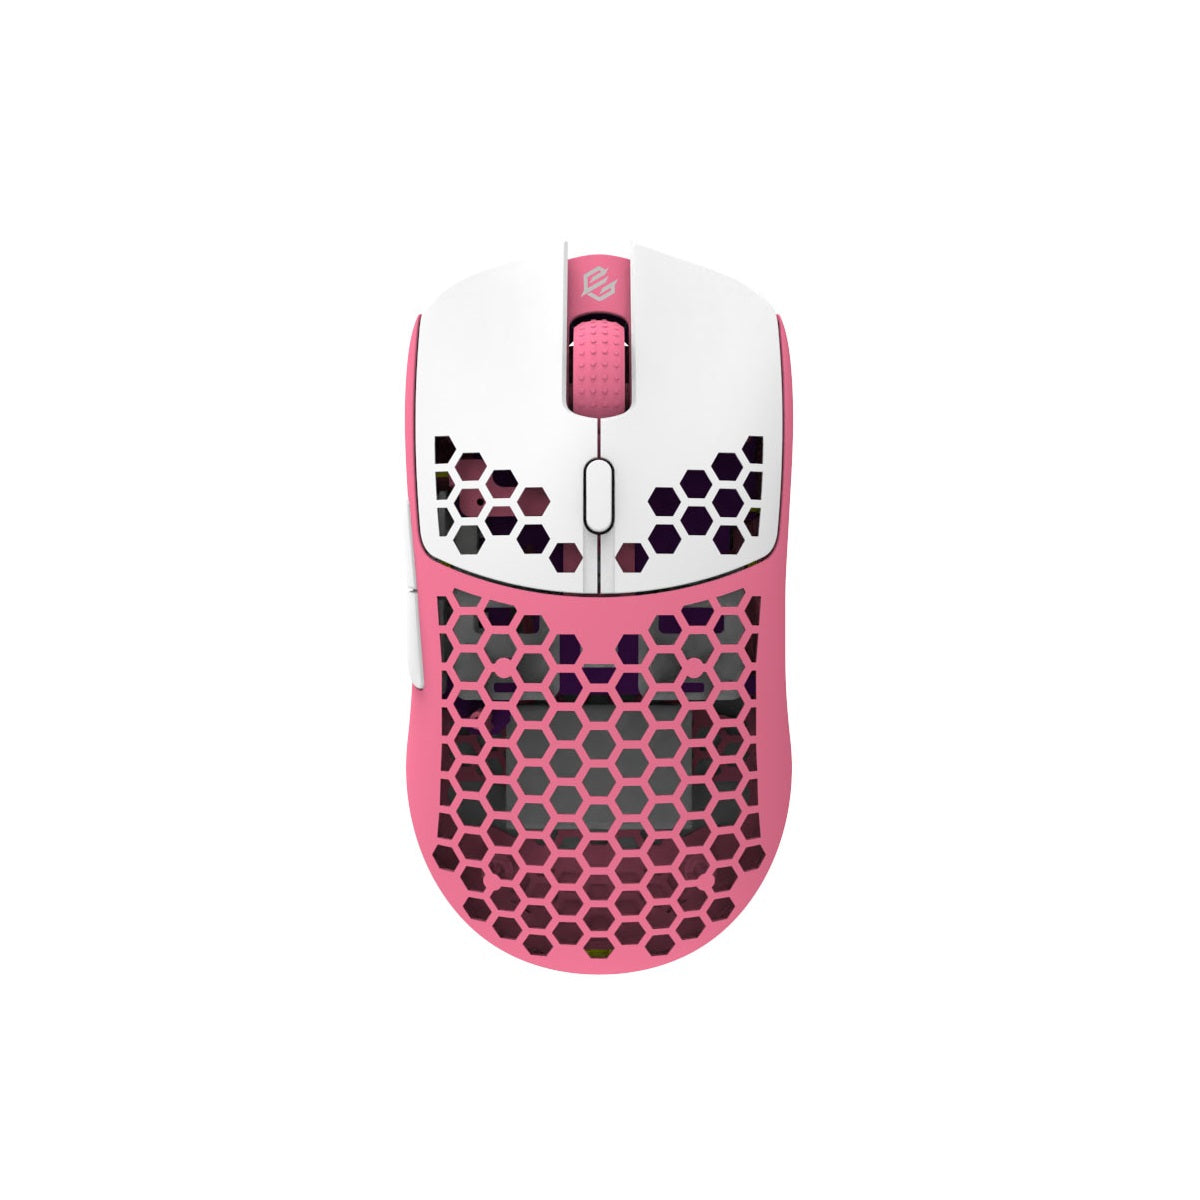 G-Wolves HTX ACE Wireless Gaming Mouse